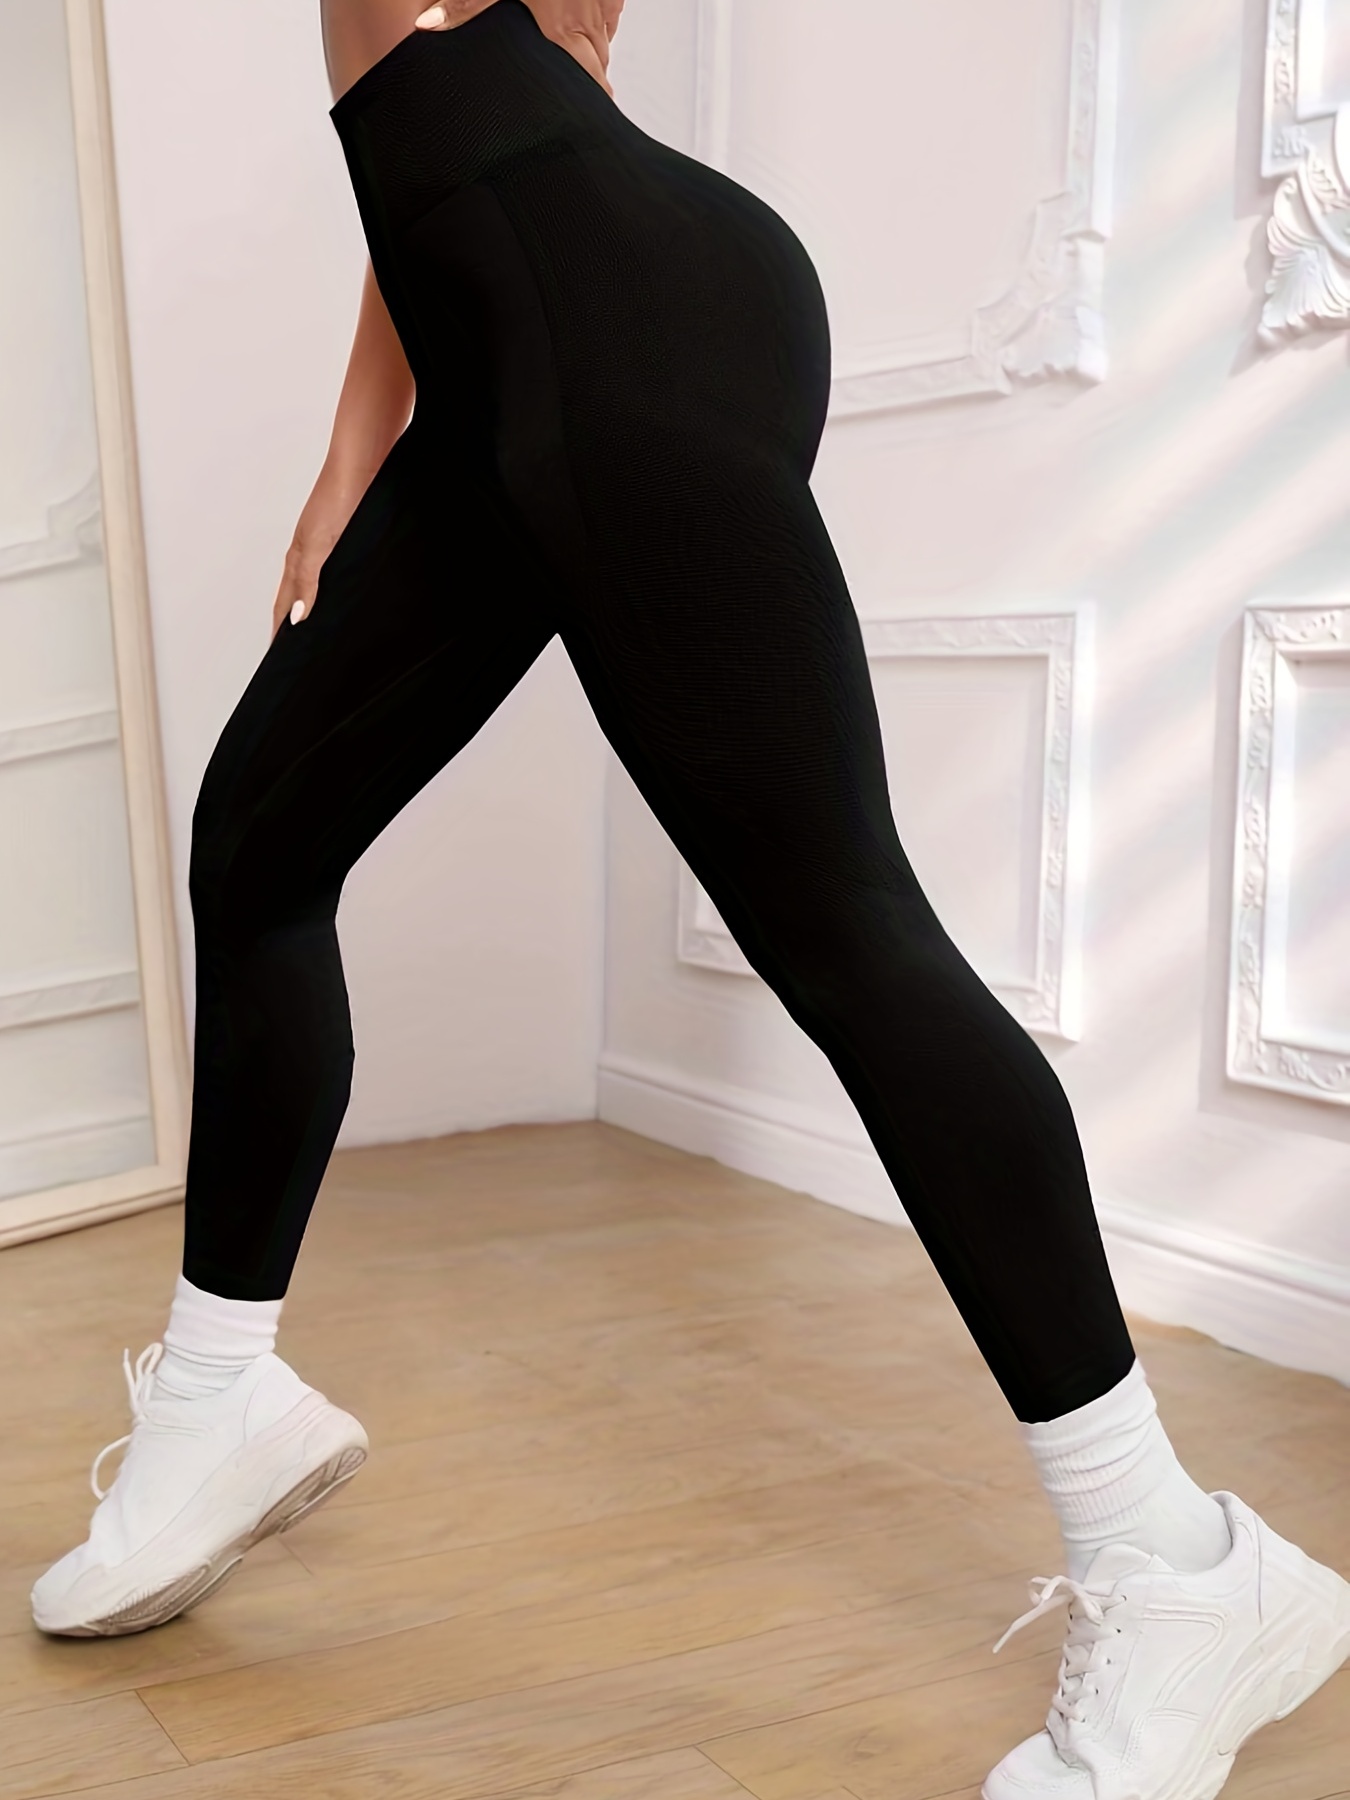 ZYIA Black High Waisted Crop Leggings Size 4 casual workout comfort running